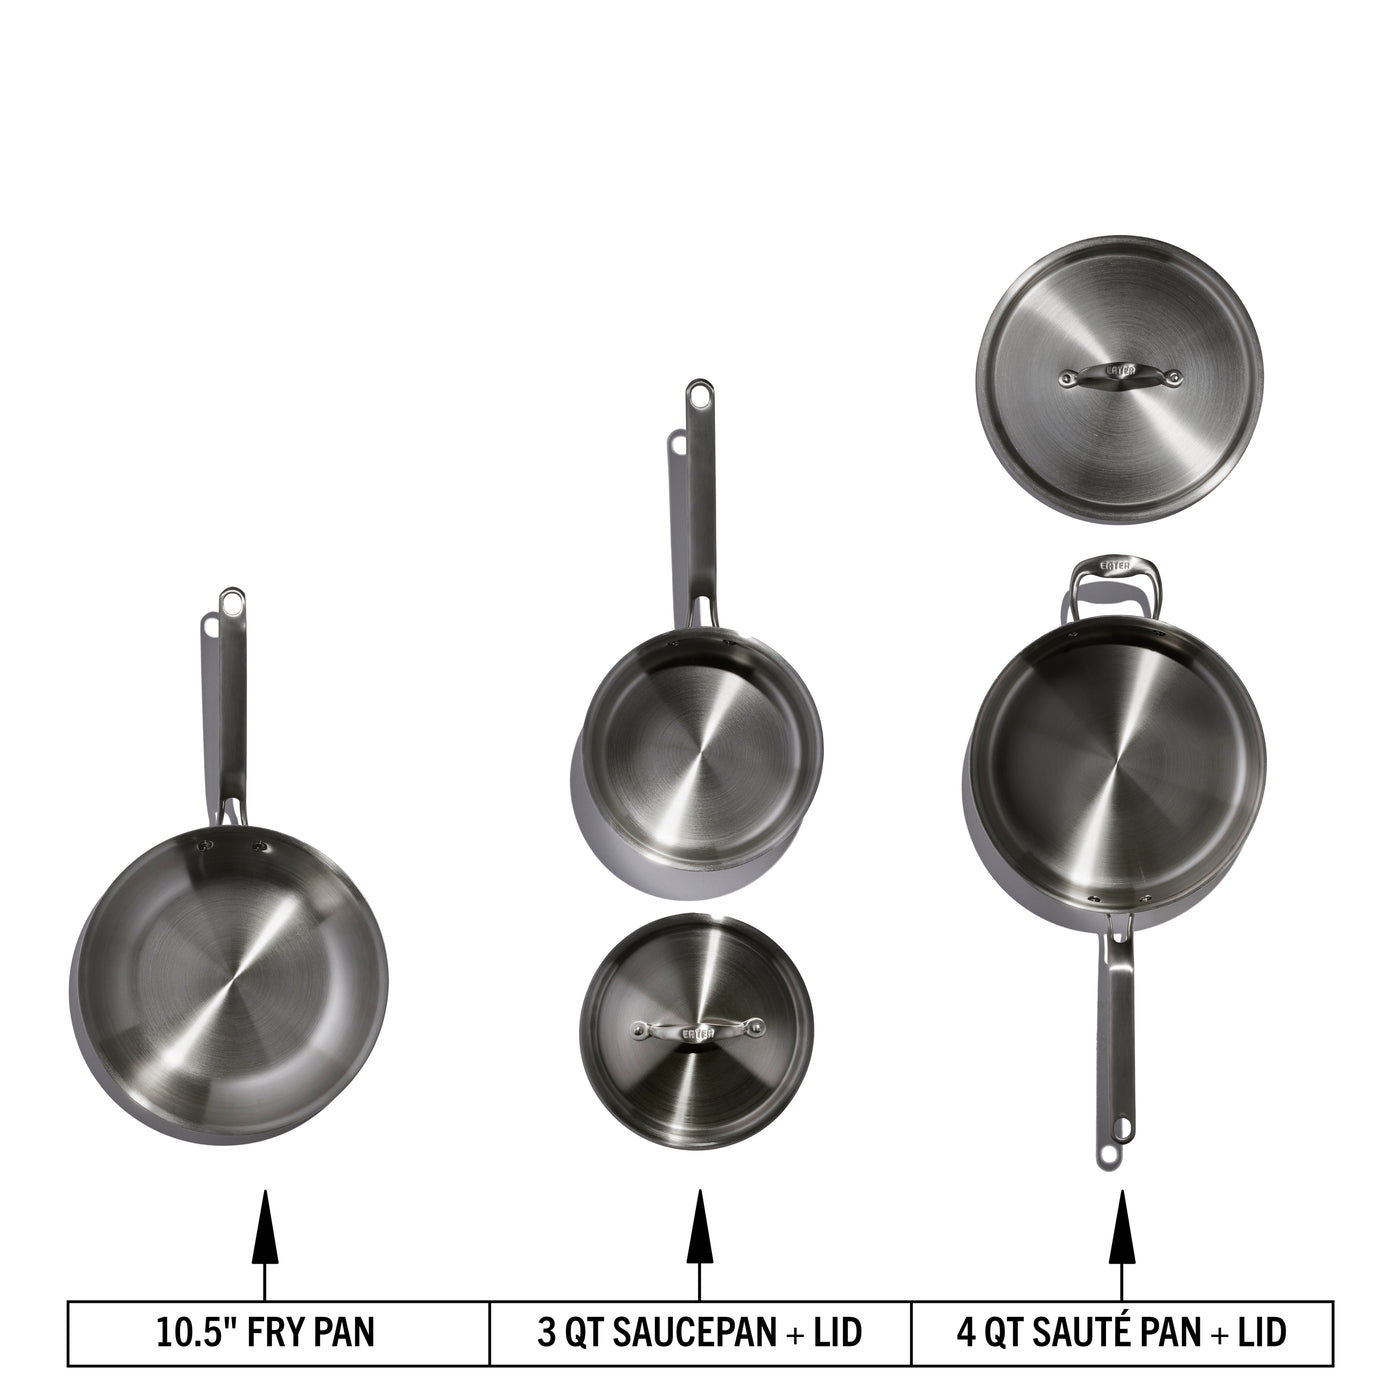 Eater Launched Stainless Steel Cookware Line - Eater